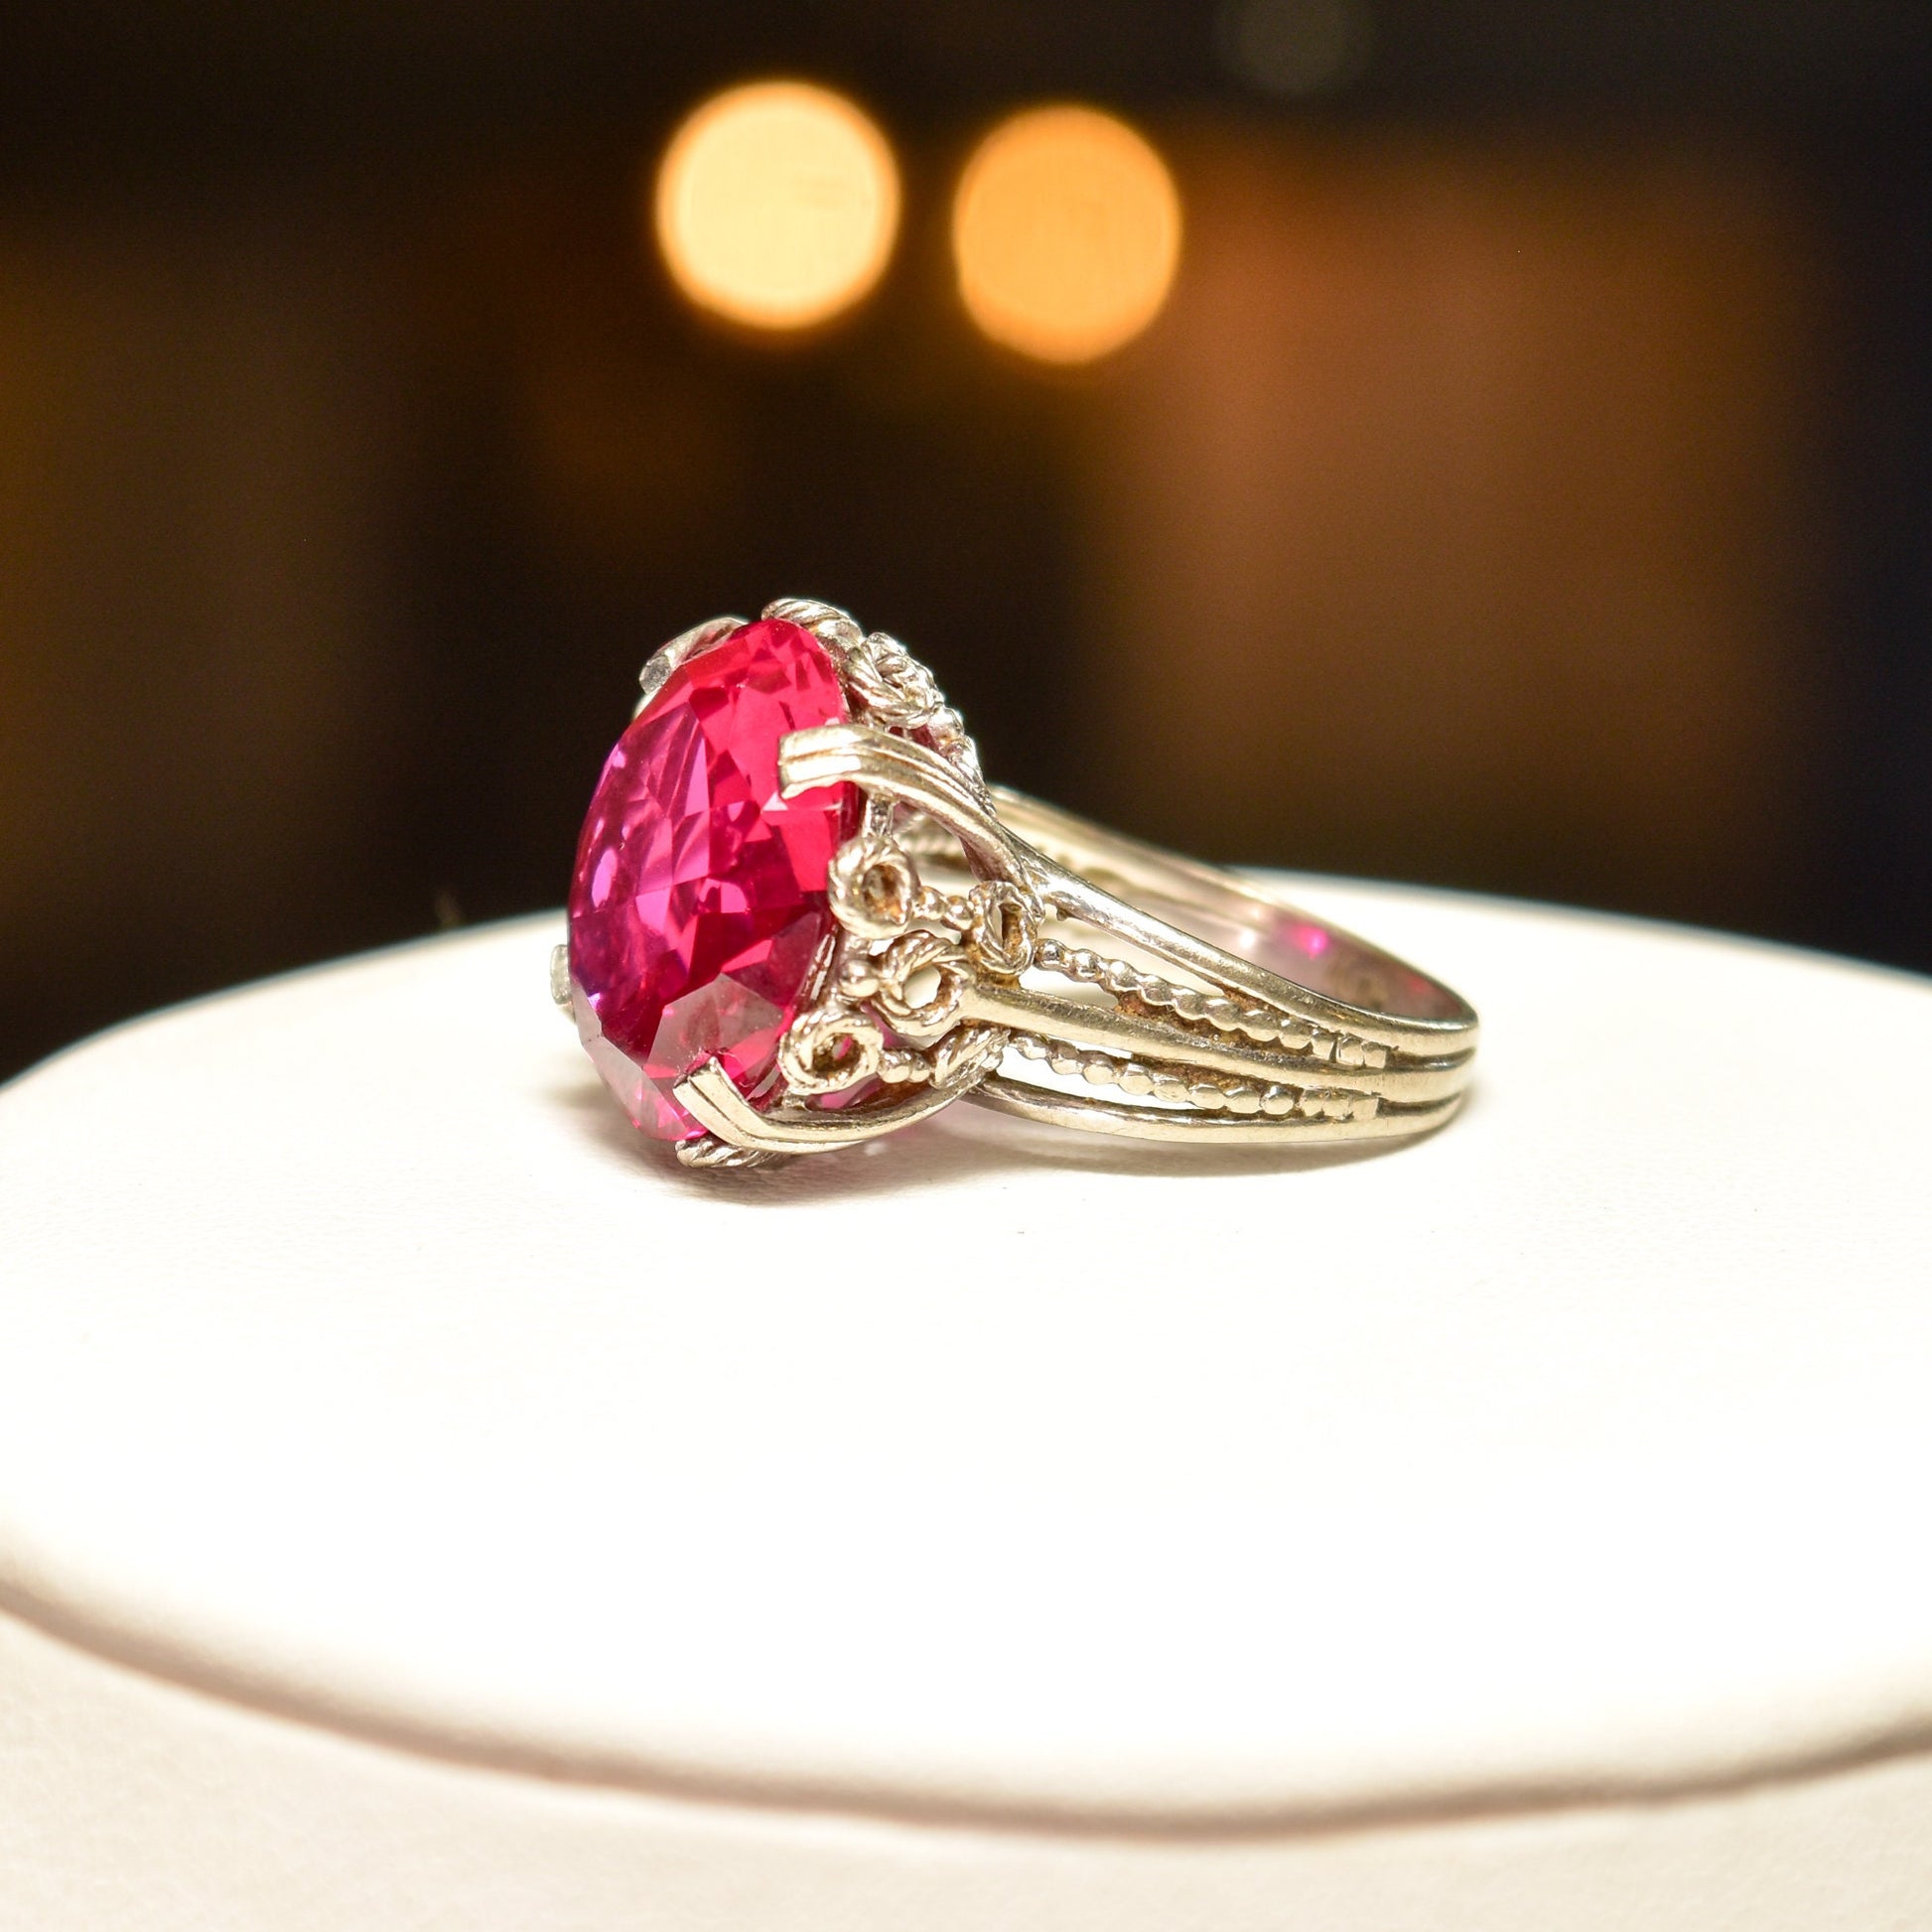 10K white gold Art Deco pink synthetic ruby cocktail ring with ornate filigree setting, size 6 3/4 US, on white background with blurred lights in the background.